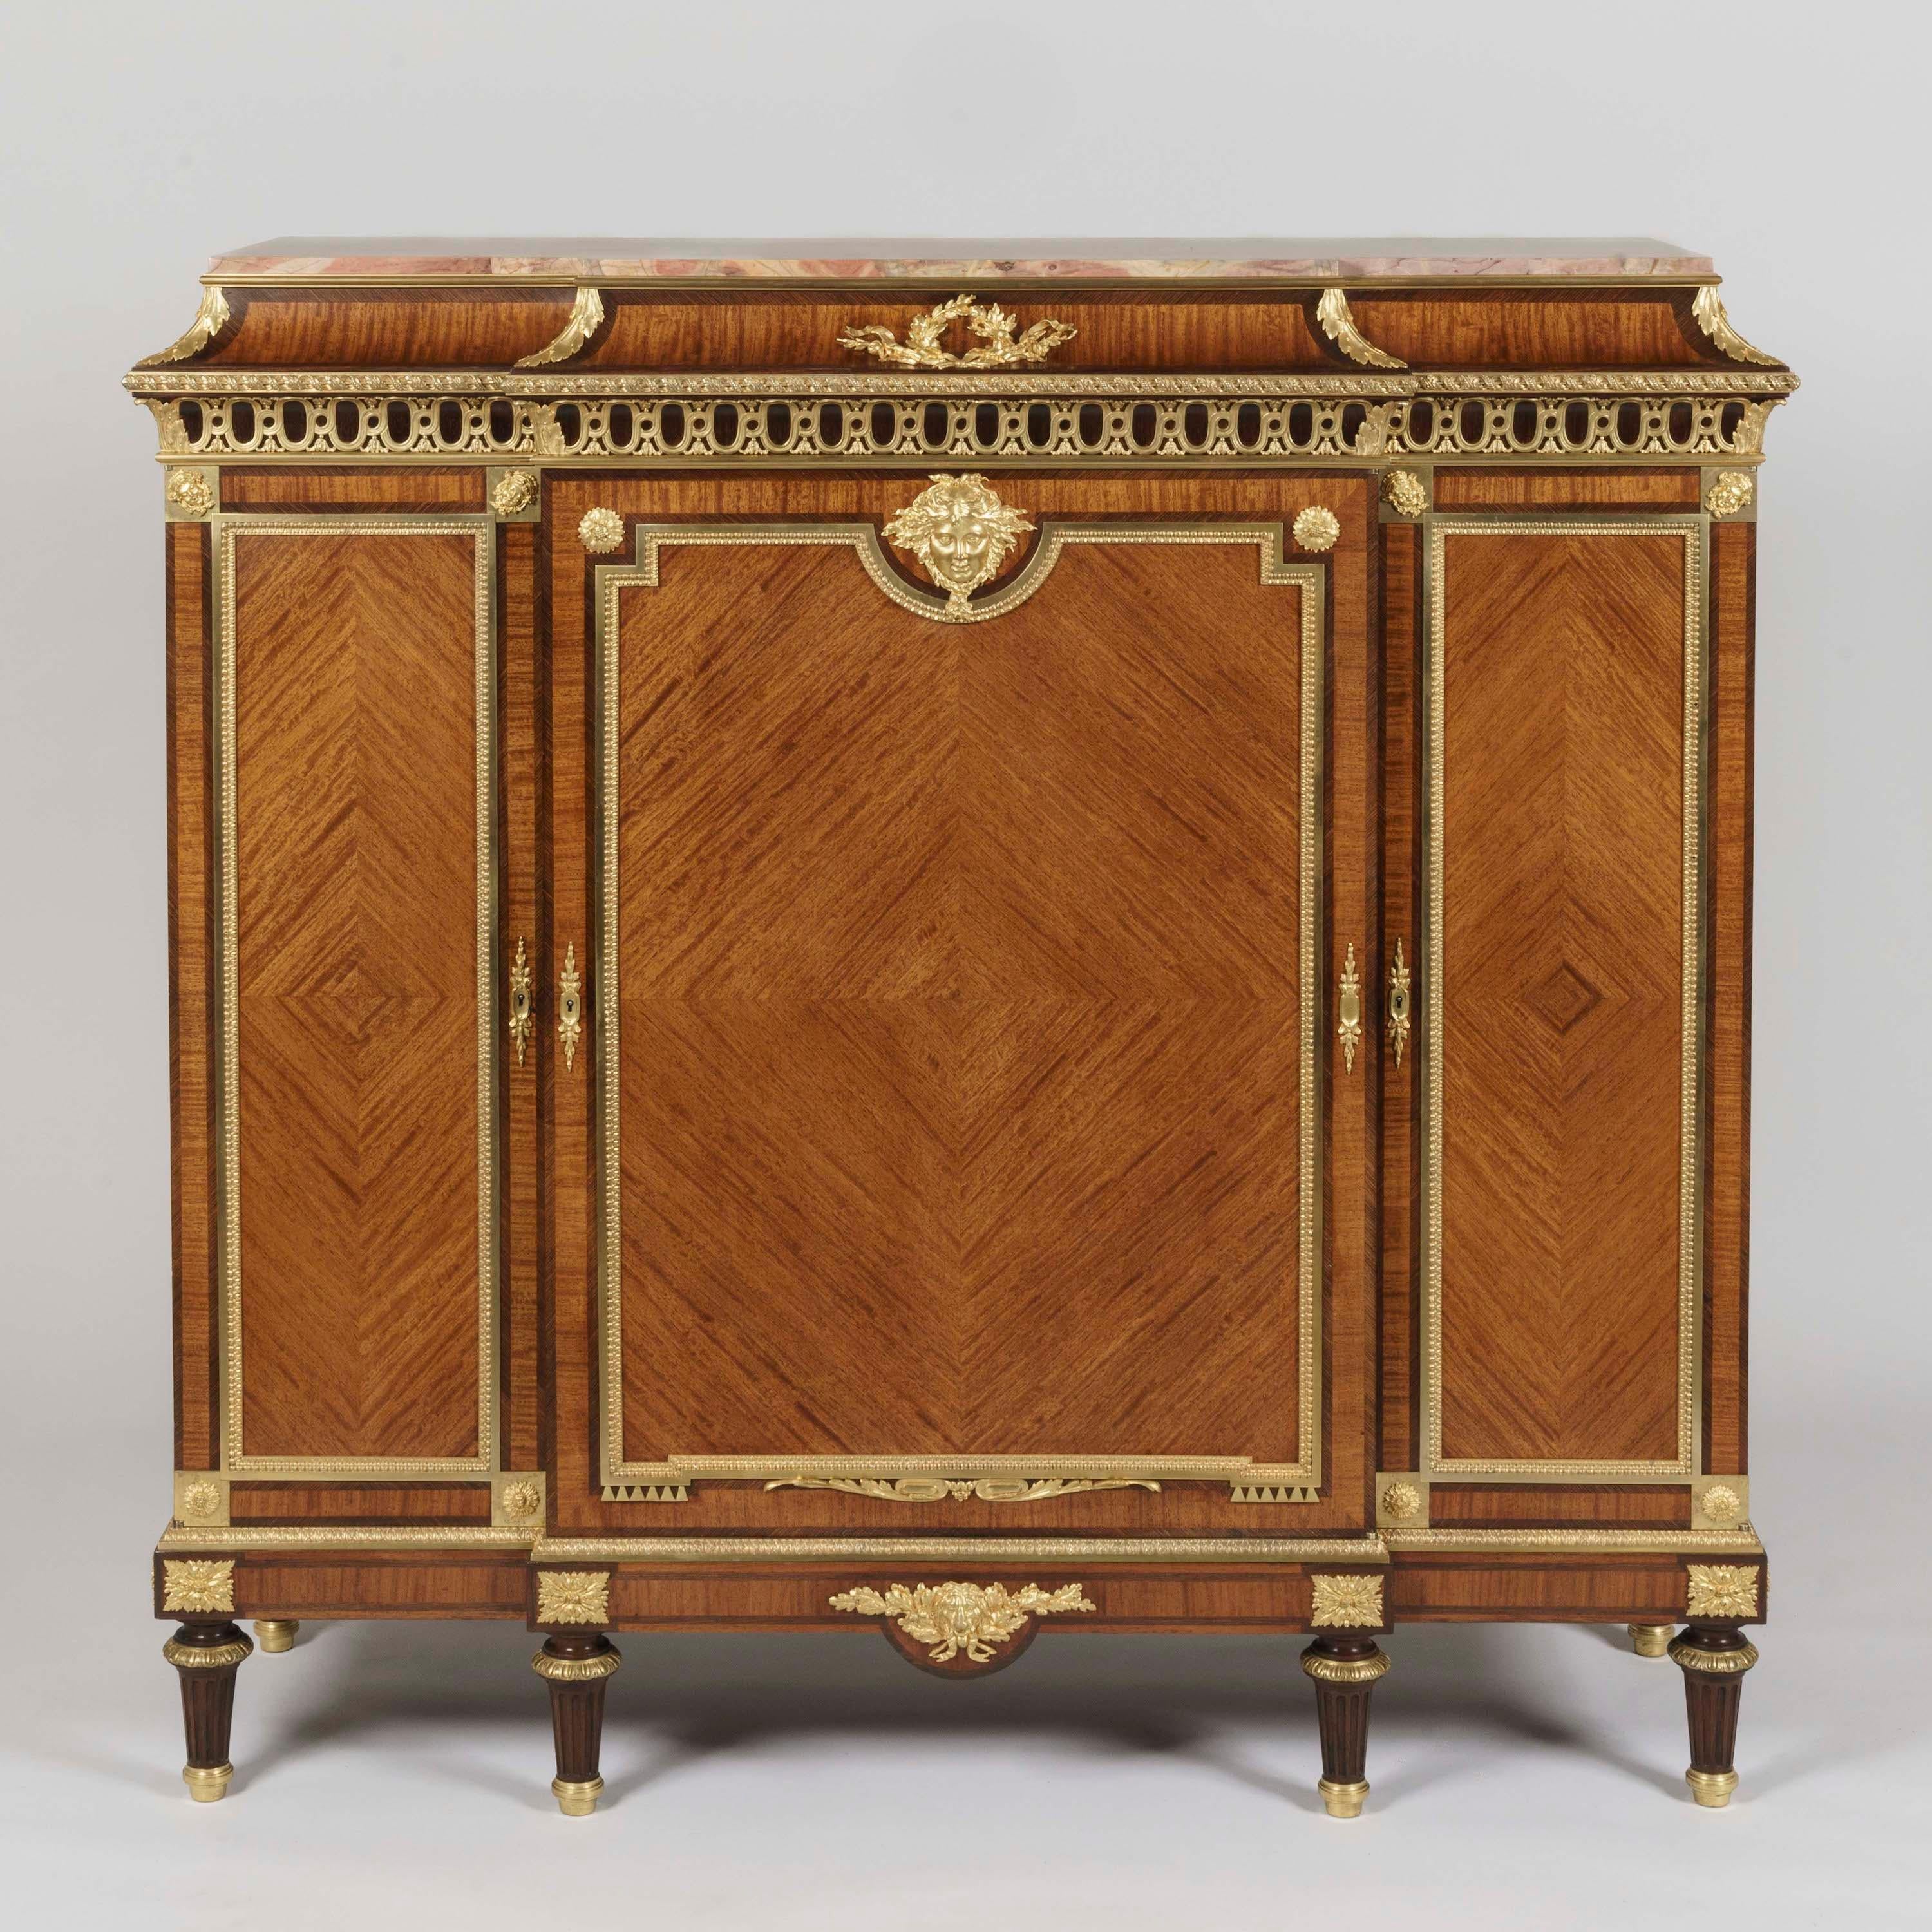 A Bois Citronnier Meuble d'Entre Deux
By François Linke

Constructed from satiné quarter-veneered bois citronnier, with rosewood crossbanding and ormolu mounts, the rectangular cabinet of slight breakfront proportions supported on tapering feet,